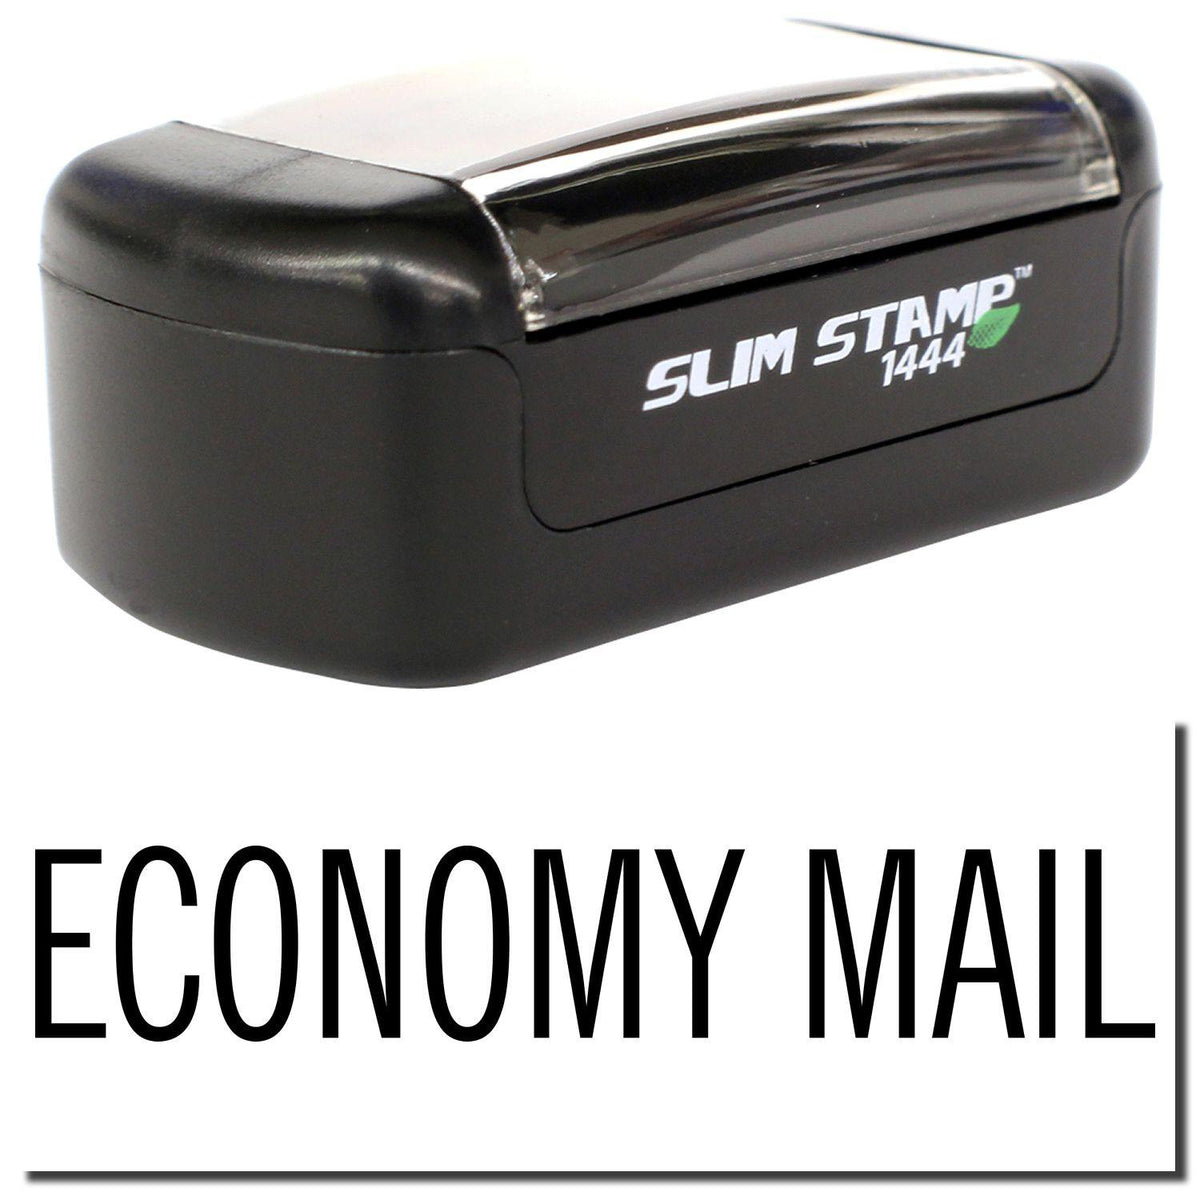 A stock office pre-inked stamp with a stamped image showing how the text &quot;ECONOMY MAIL&quot; is displayed after stamping.